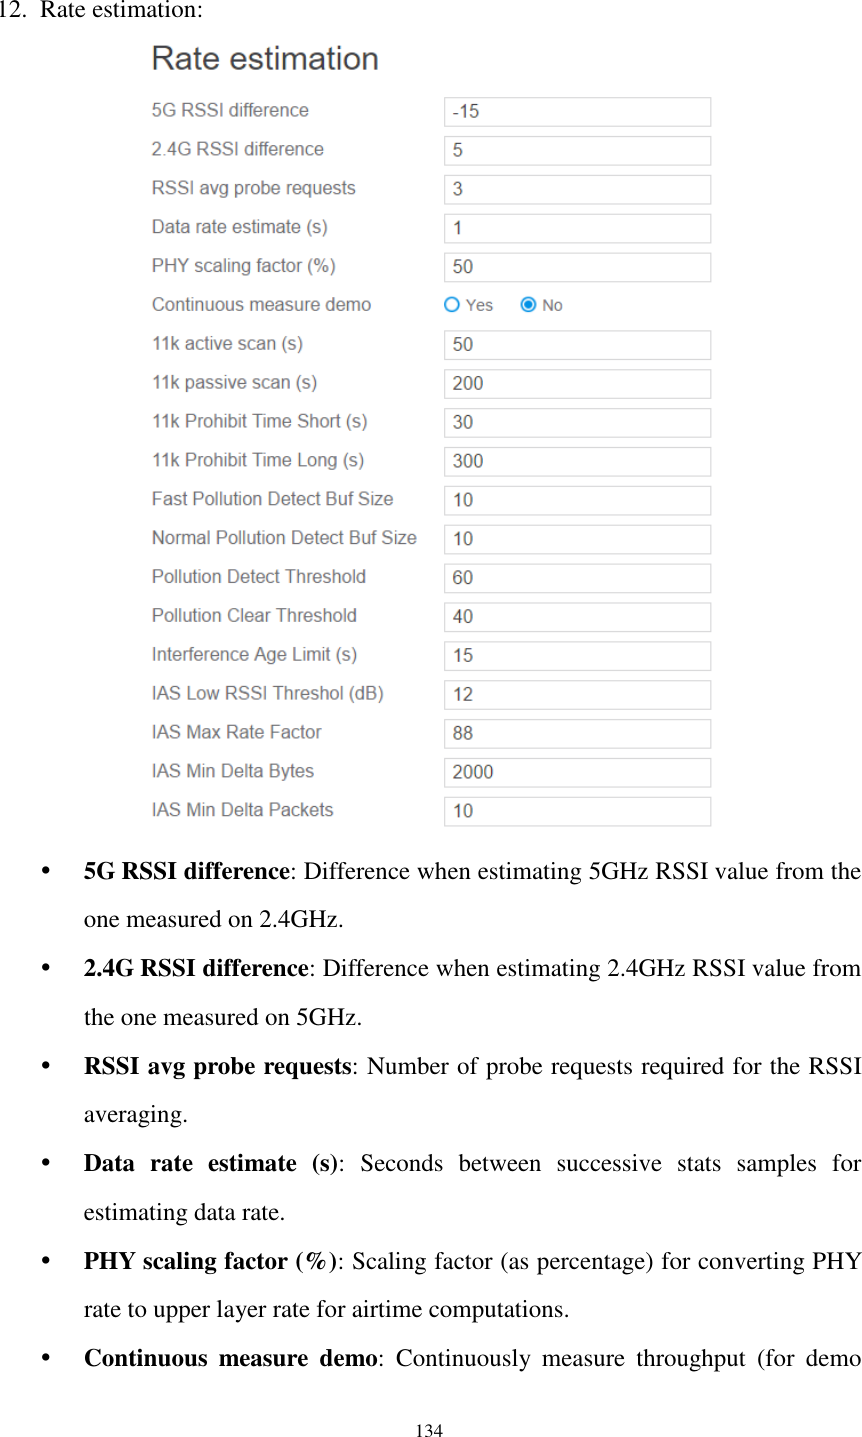  134  12. Rate estimation:   5G RSSI difference: Difference when estimating 5GHz RSSI value from the one measured on 2.4GHz.  2.4G RSSI difference: Difference when estimating 2.4GHz RSSI value from the one measured on 5GHz.  RSSI avg probe requests: Number of probe requests required for the RSSI averaging.  Data  rate  estimate  (s):  Seconds  between  successive  stats  samples  for estimating data rate.  PHY scaling factor (%): Scaling factor (as percentage) for converting PHY rate to upper layer rate for airtime computations.  Continuous  measure  demo:  Continuously  measure  throughput  (for  demo 